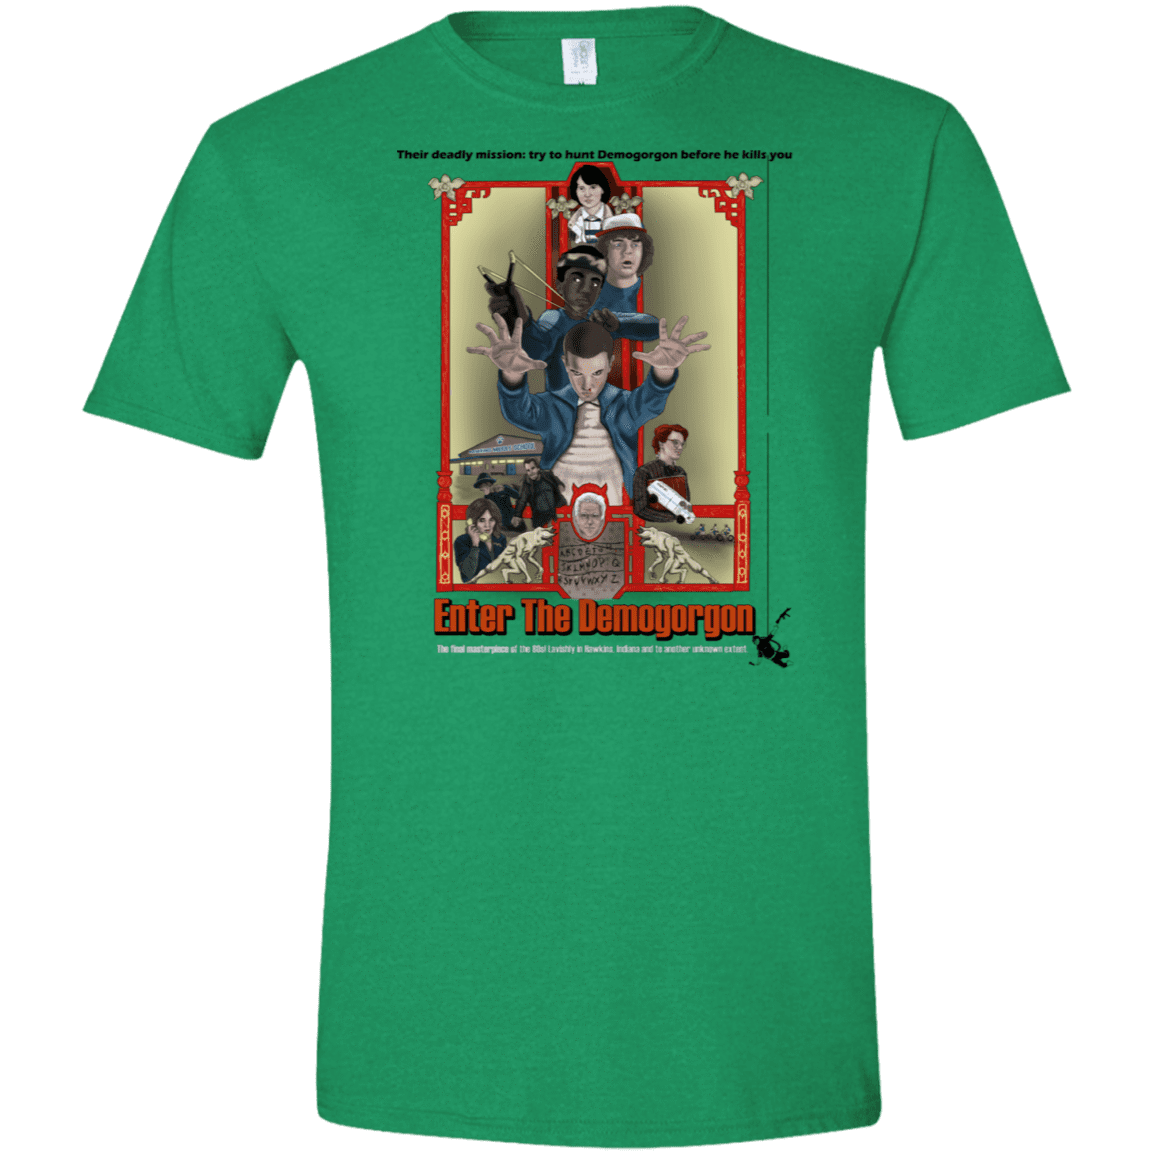 T-Shirts Heather Irish Green / M Enter the Dragon Men's Semi-Fitted Softstyle